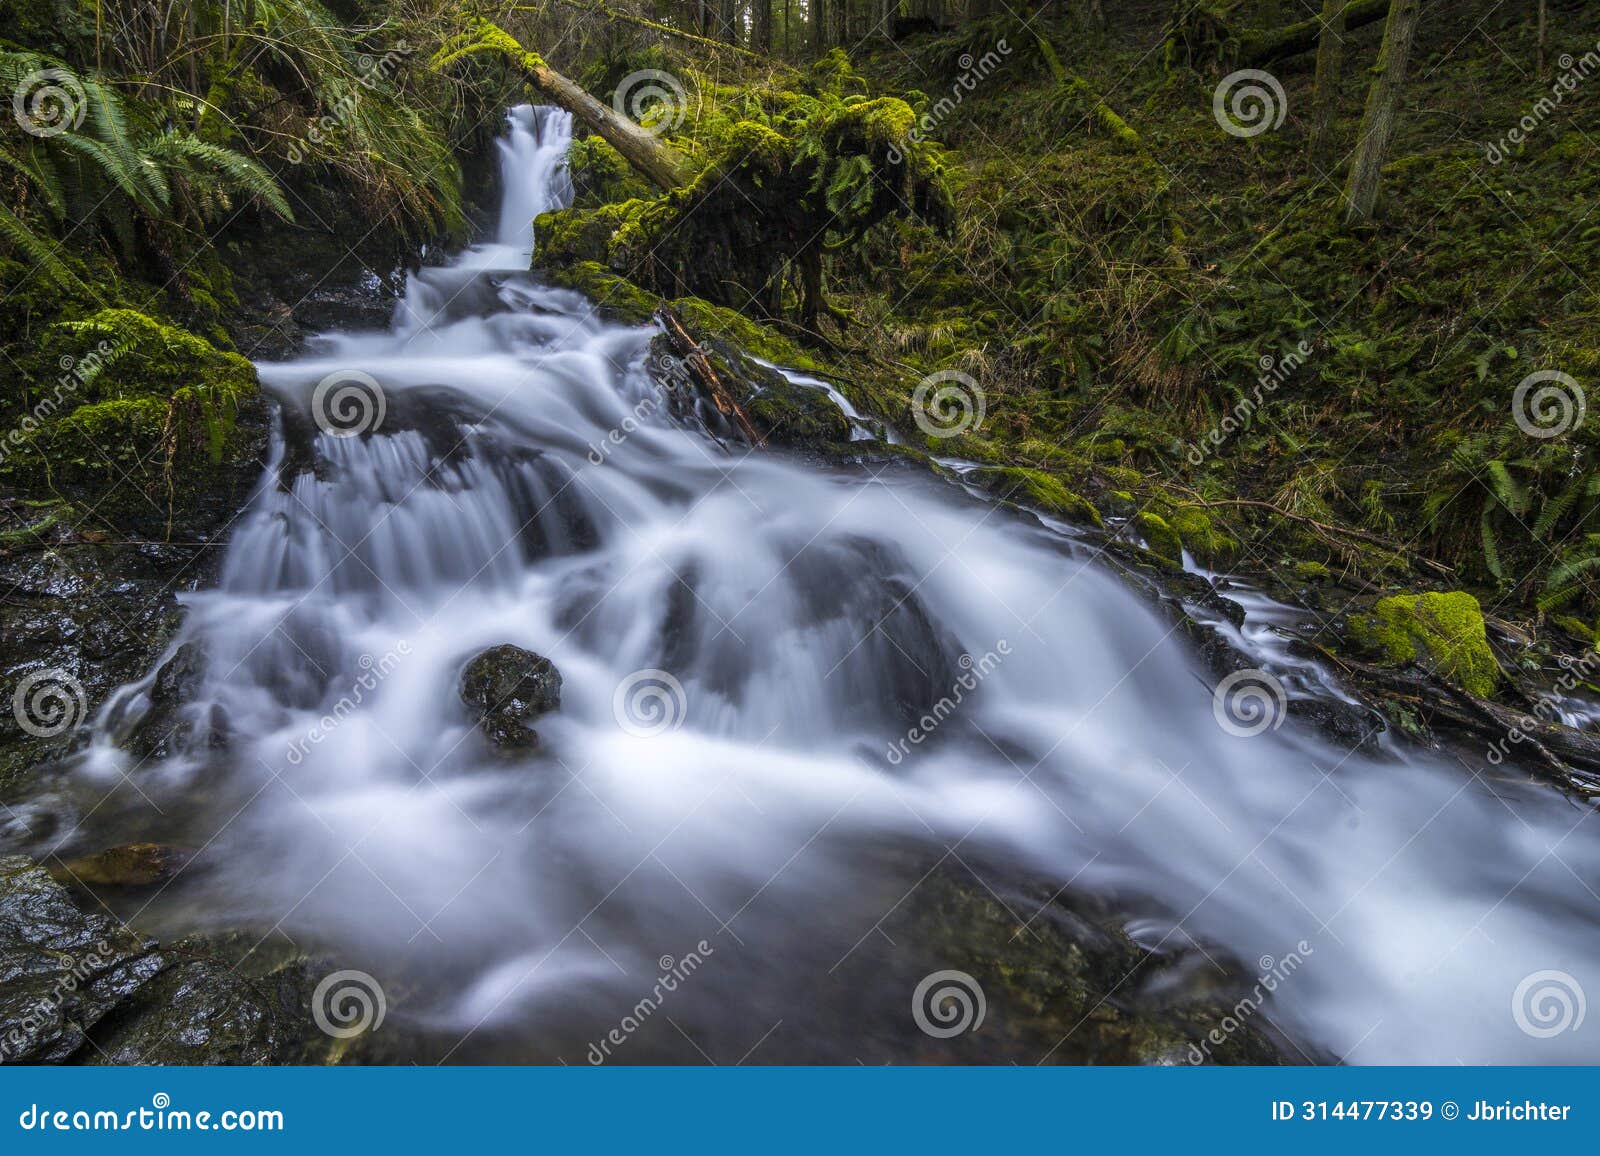 stream on orcas island in the puget sound of washington state.